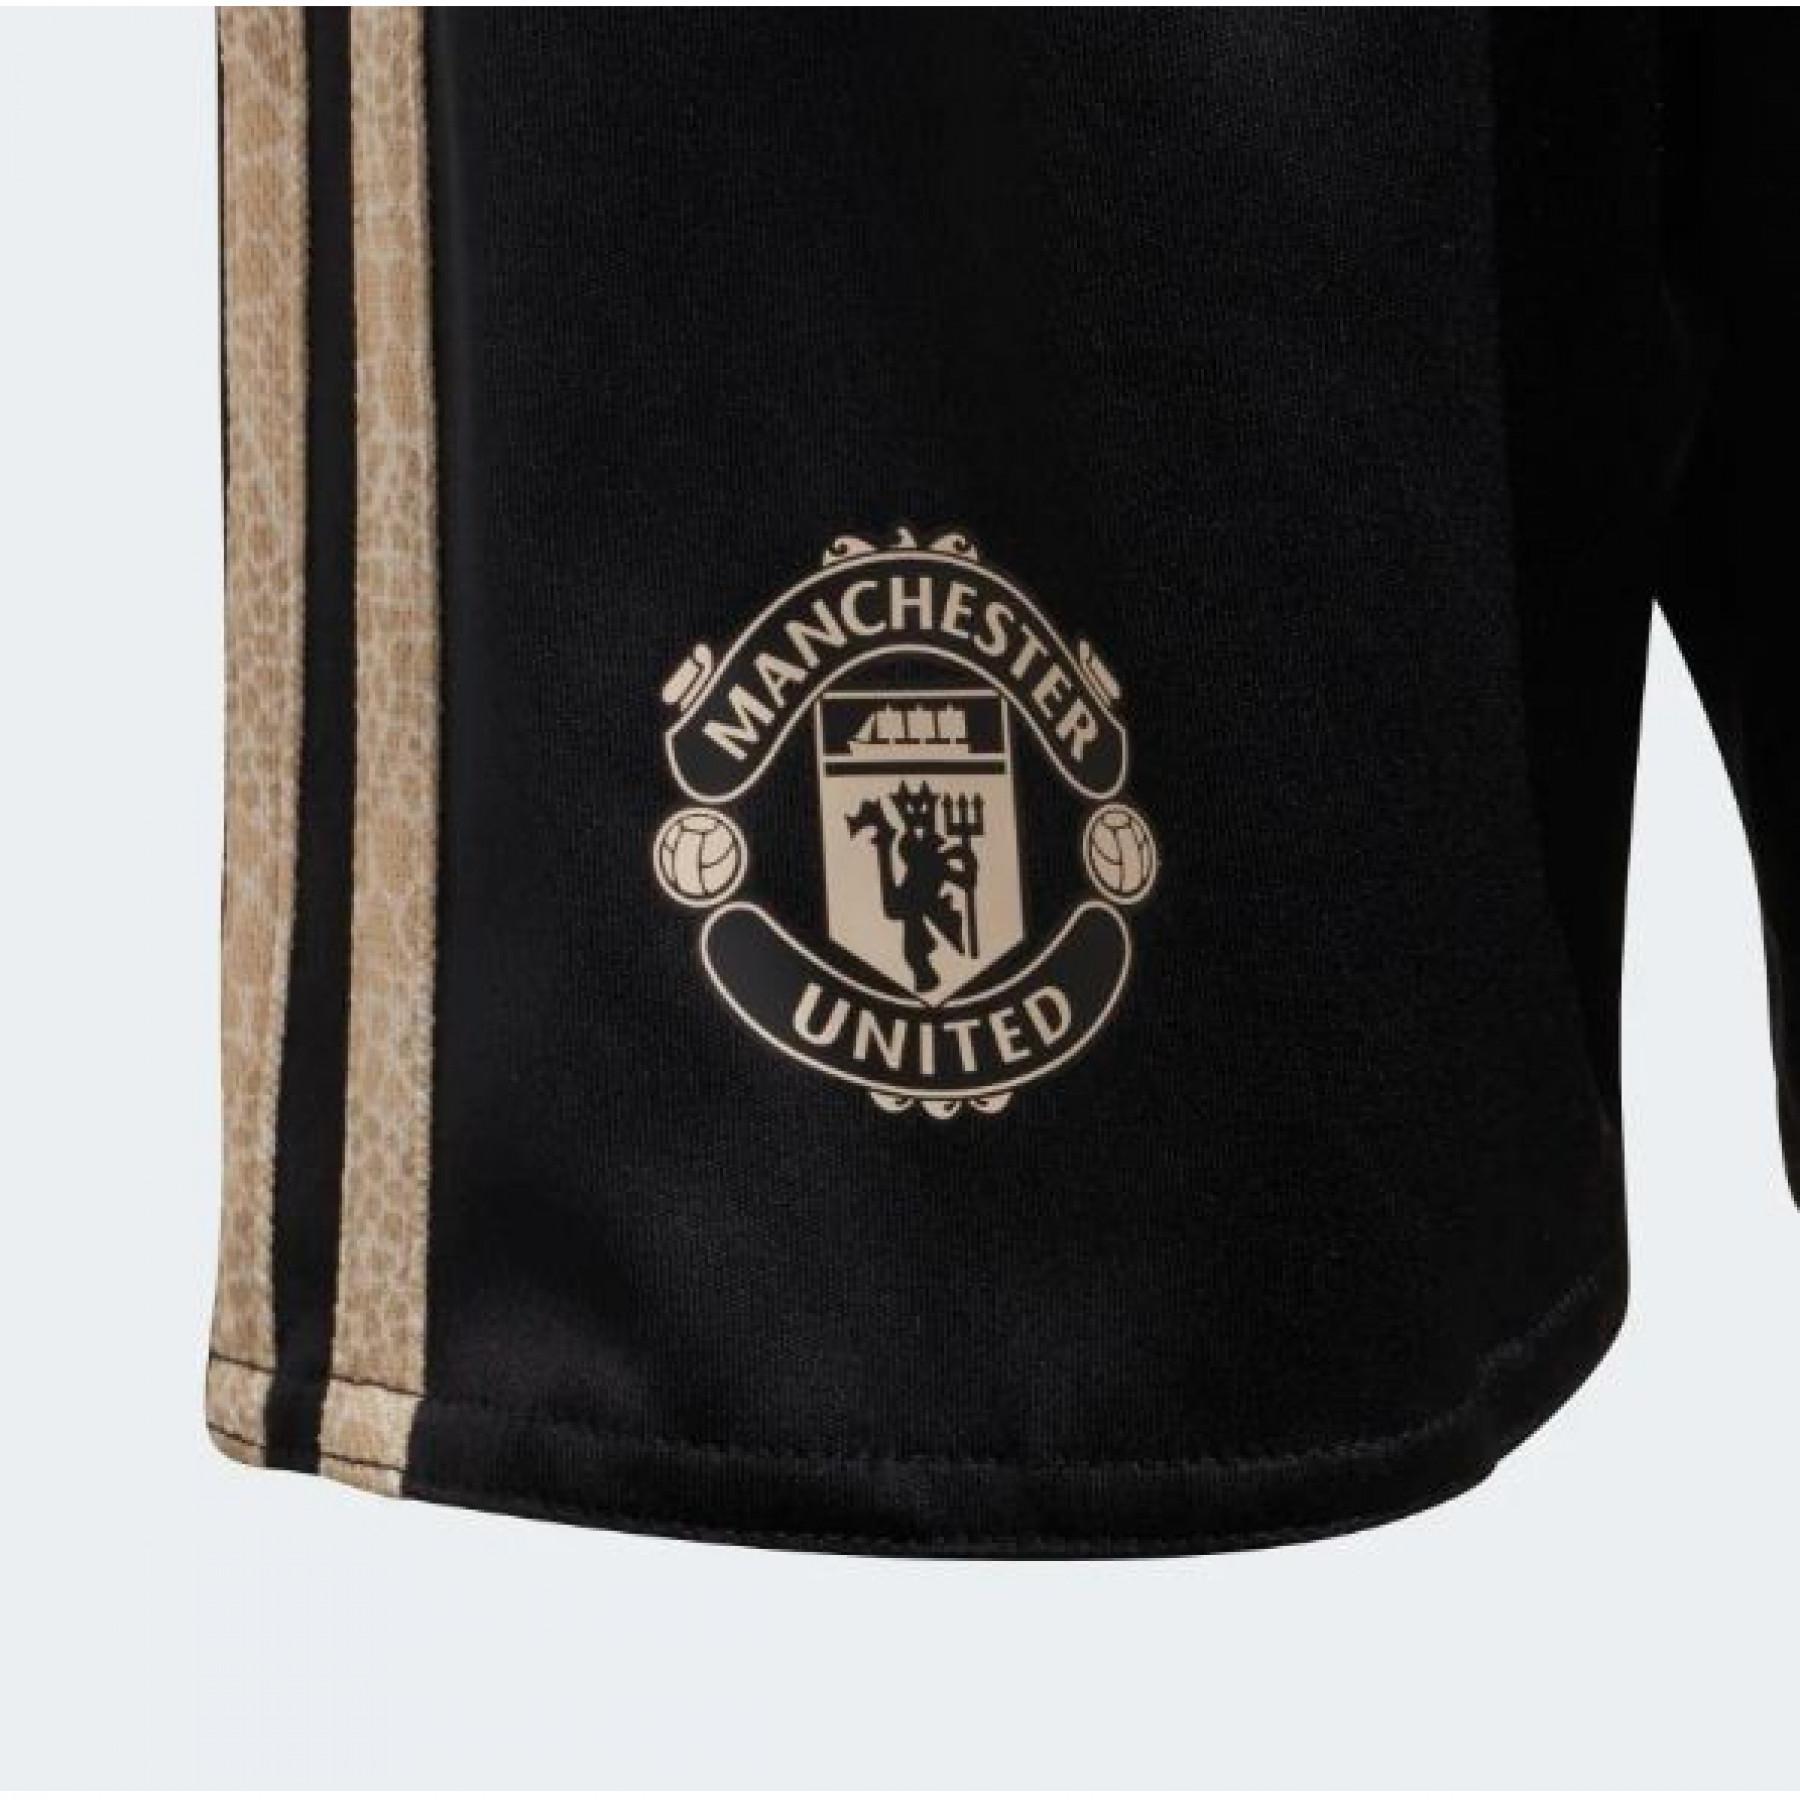 Outdoor mini kit Manchester United 2019/20